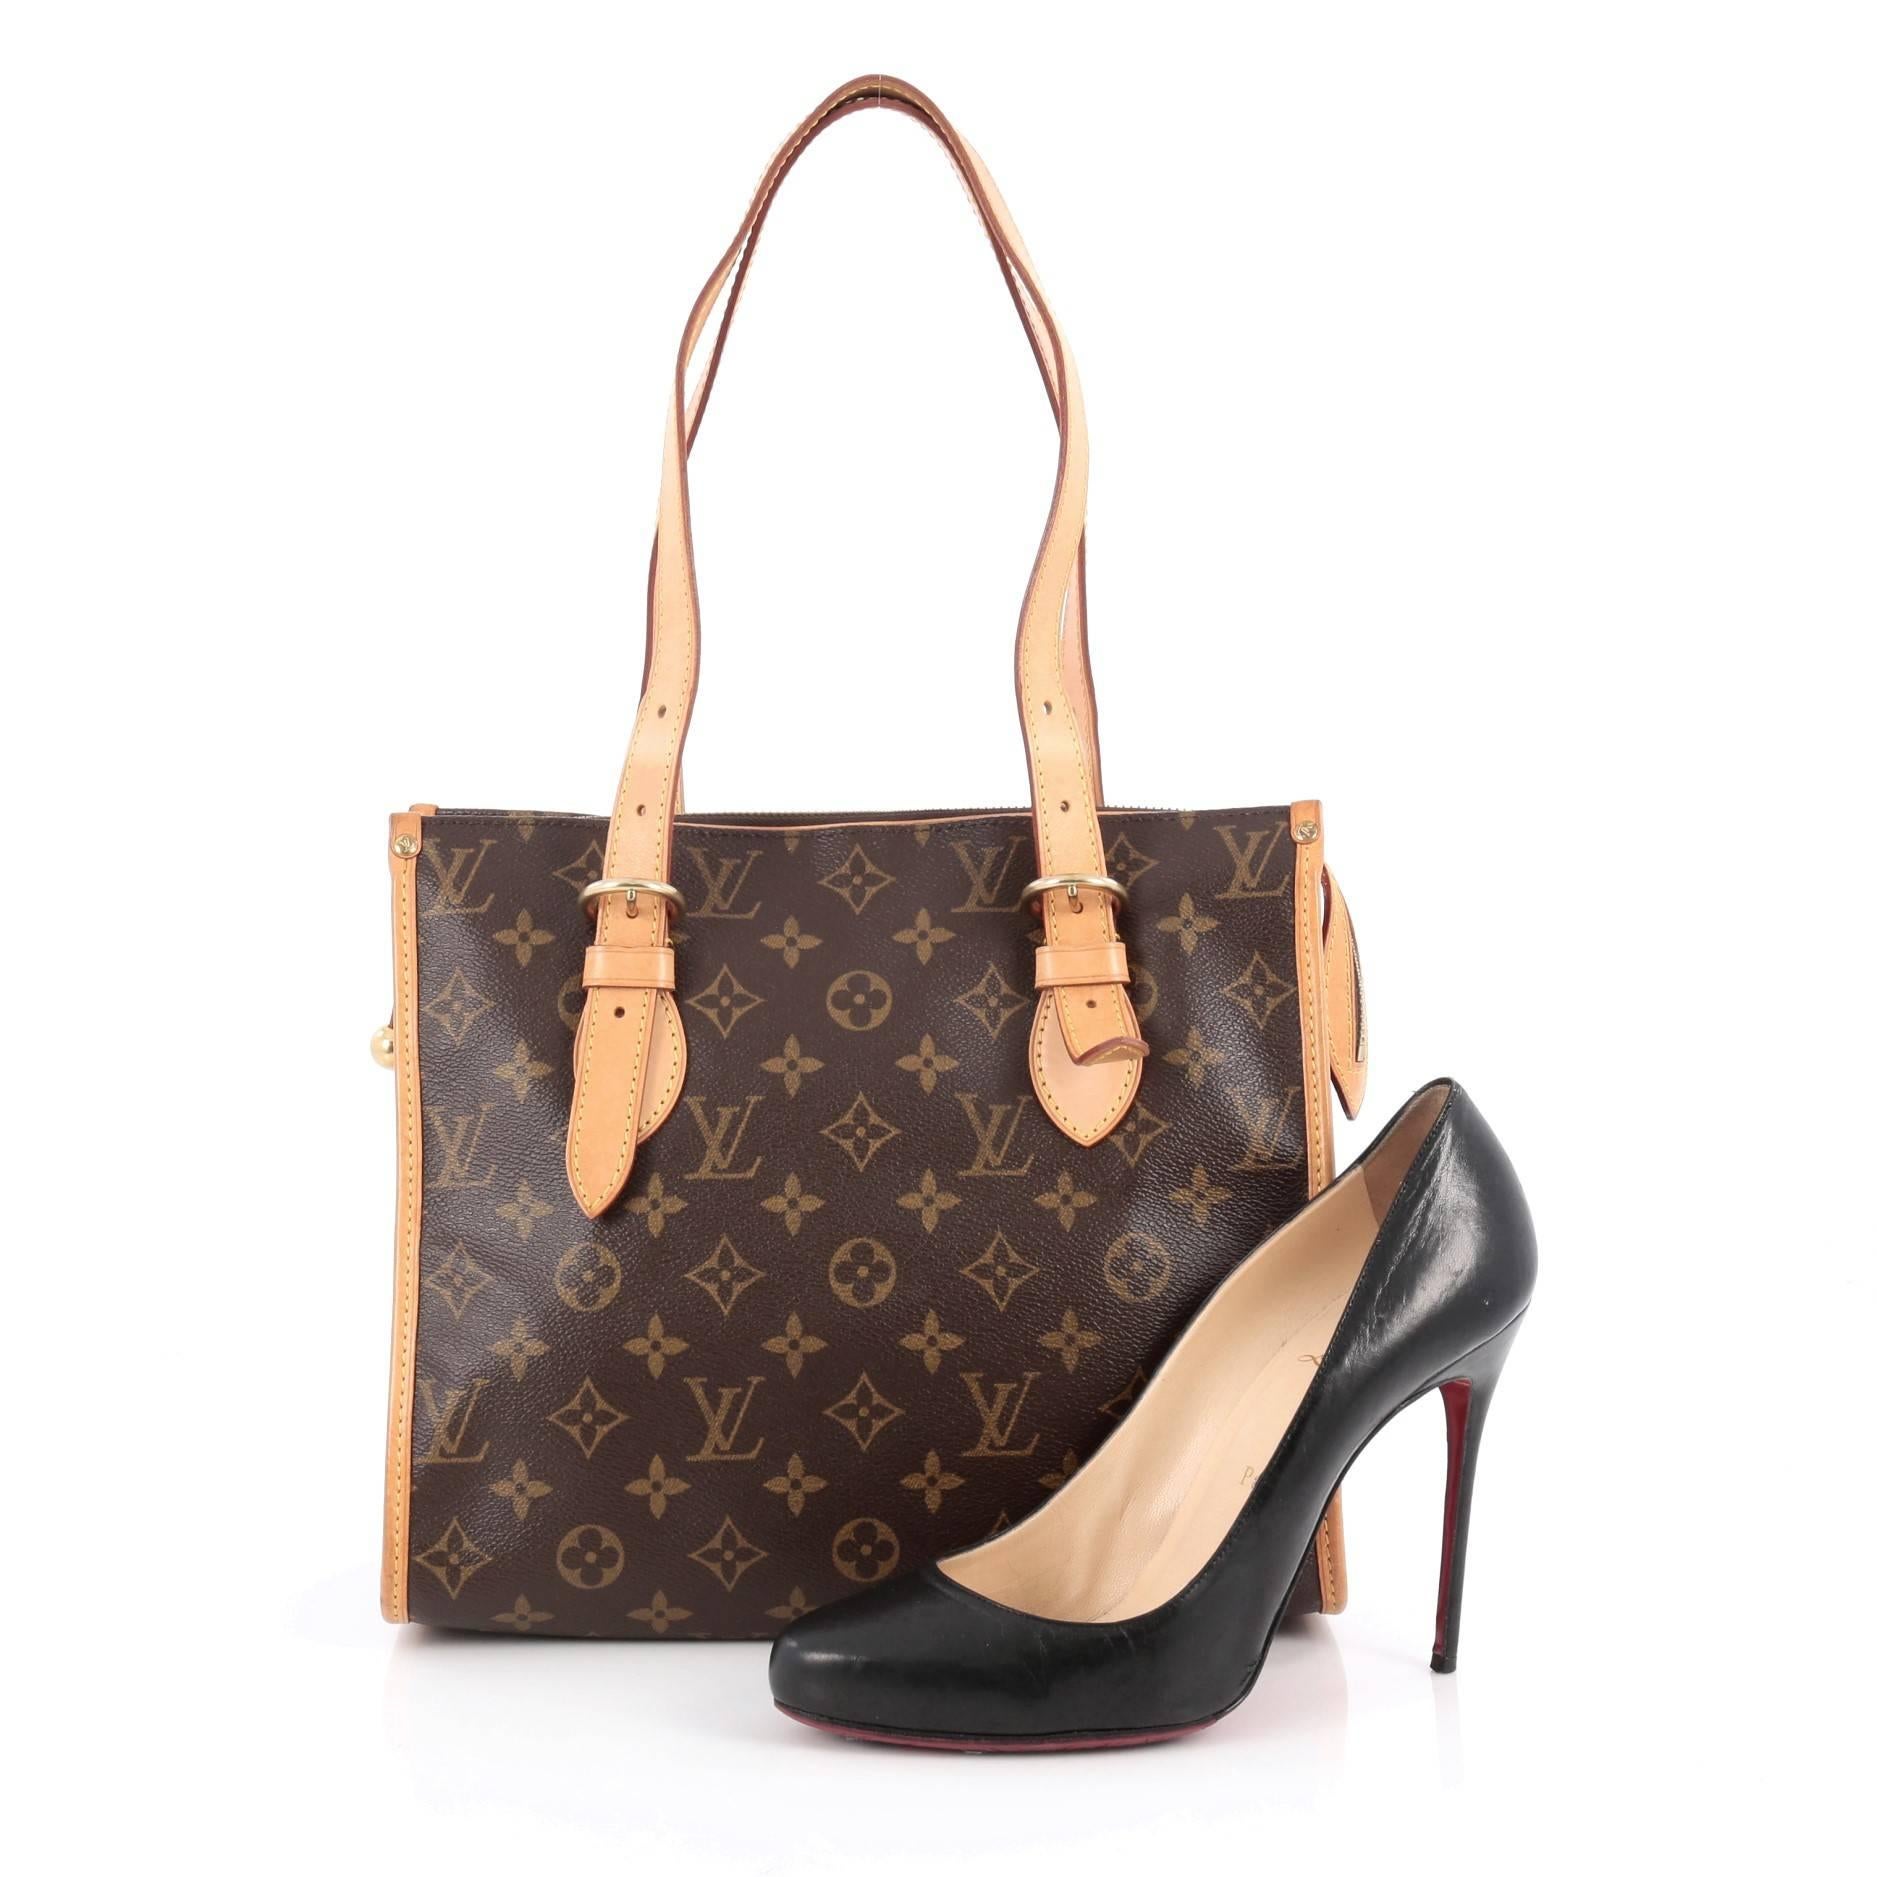 This authentic Louis Vuitton Popincourt Tote Monogram Canvas Haut is a practical yet iconic bag that is sure to be a wardrobe staple. Crafted from Louis Vuitton's iconic brown monogram coated canvas, this bag features cowhide vachetta leather